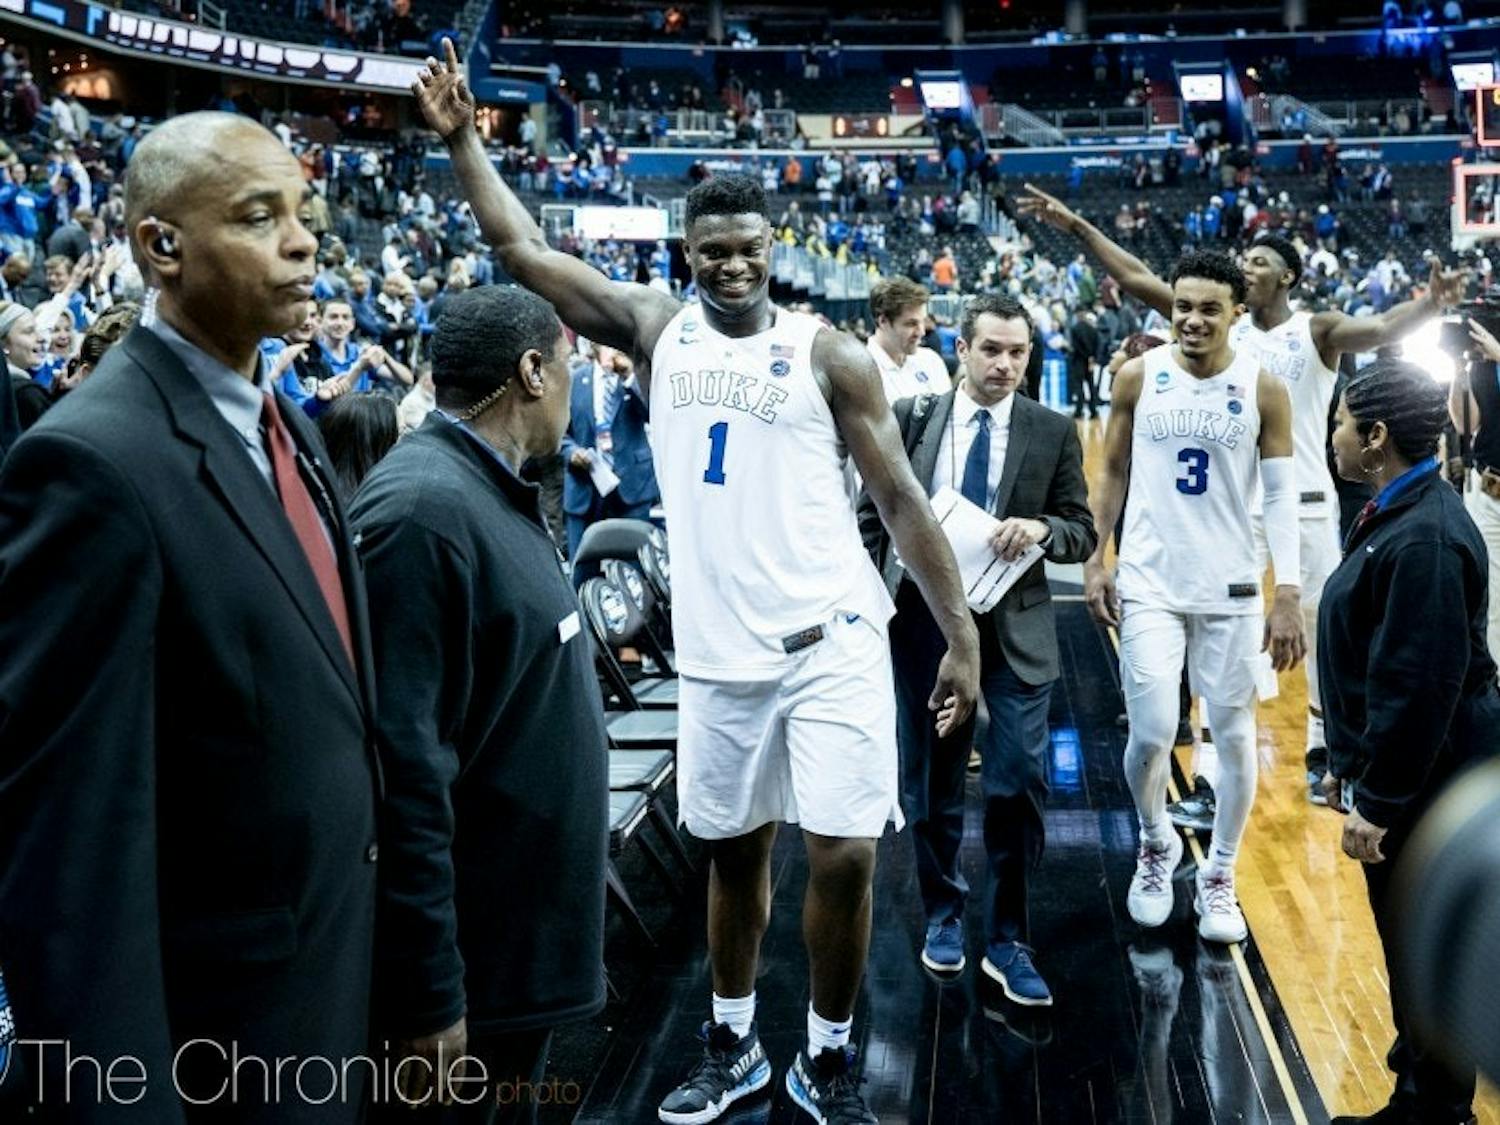 The Blue Devils have narrowly escaped two close games in a row in the NCAA tournament.